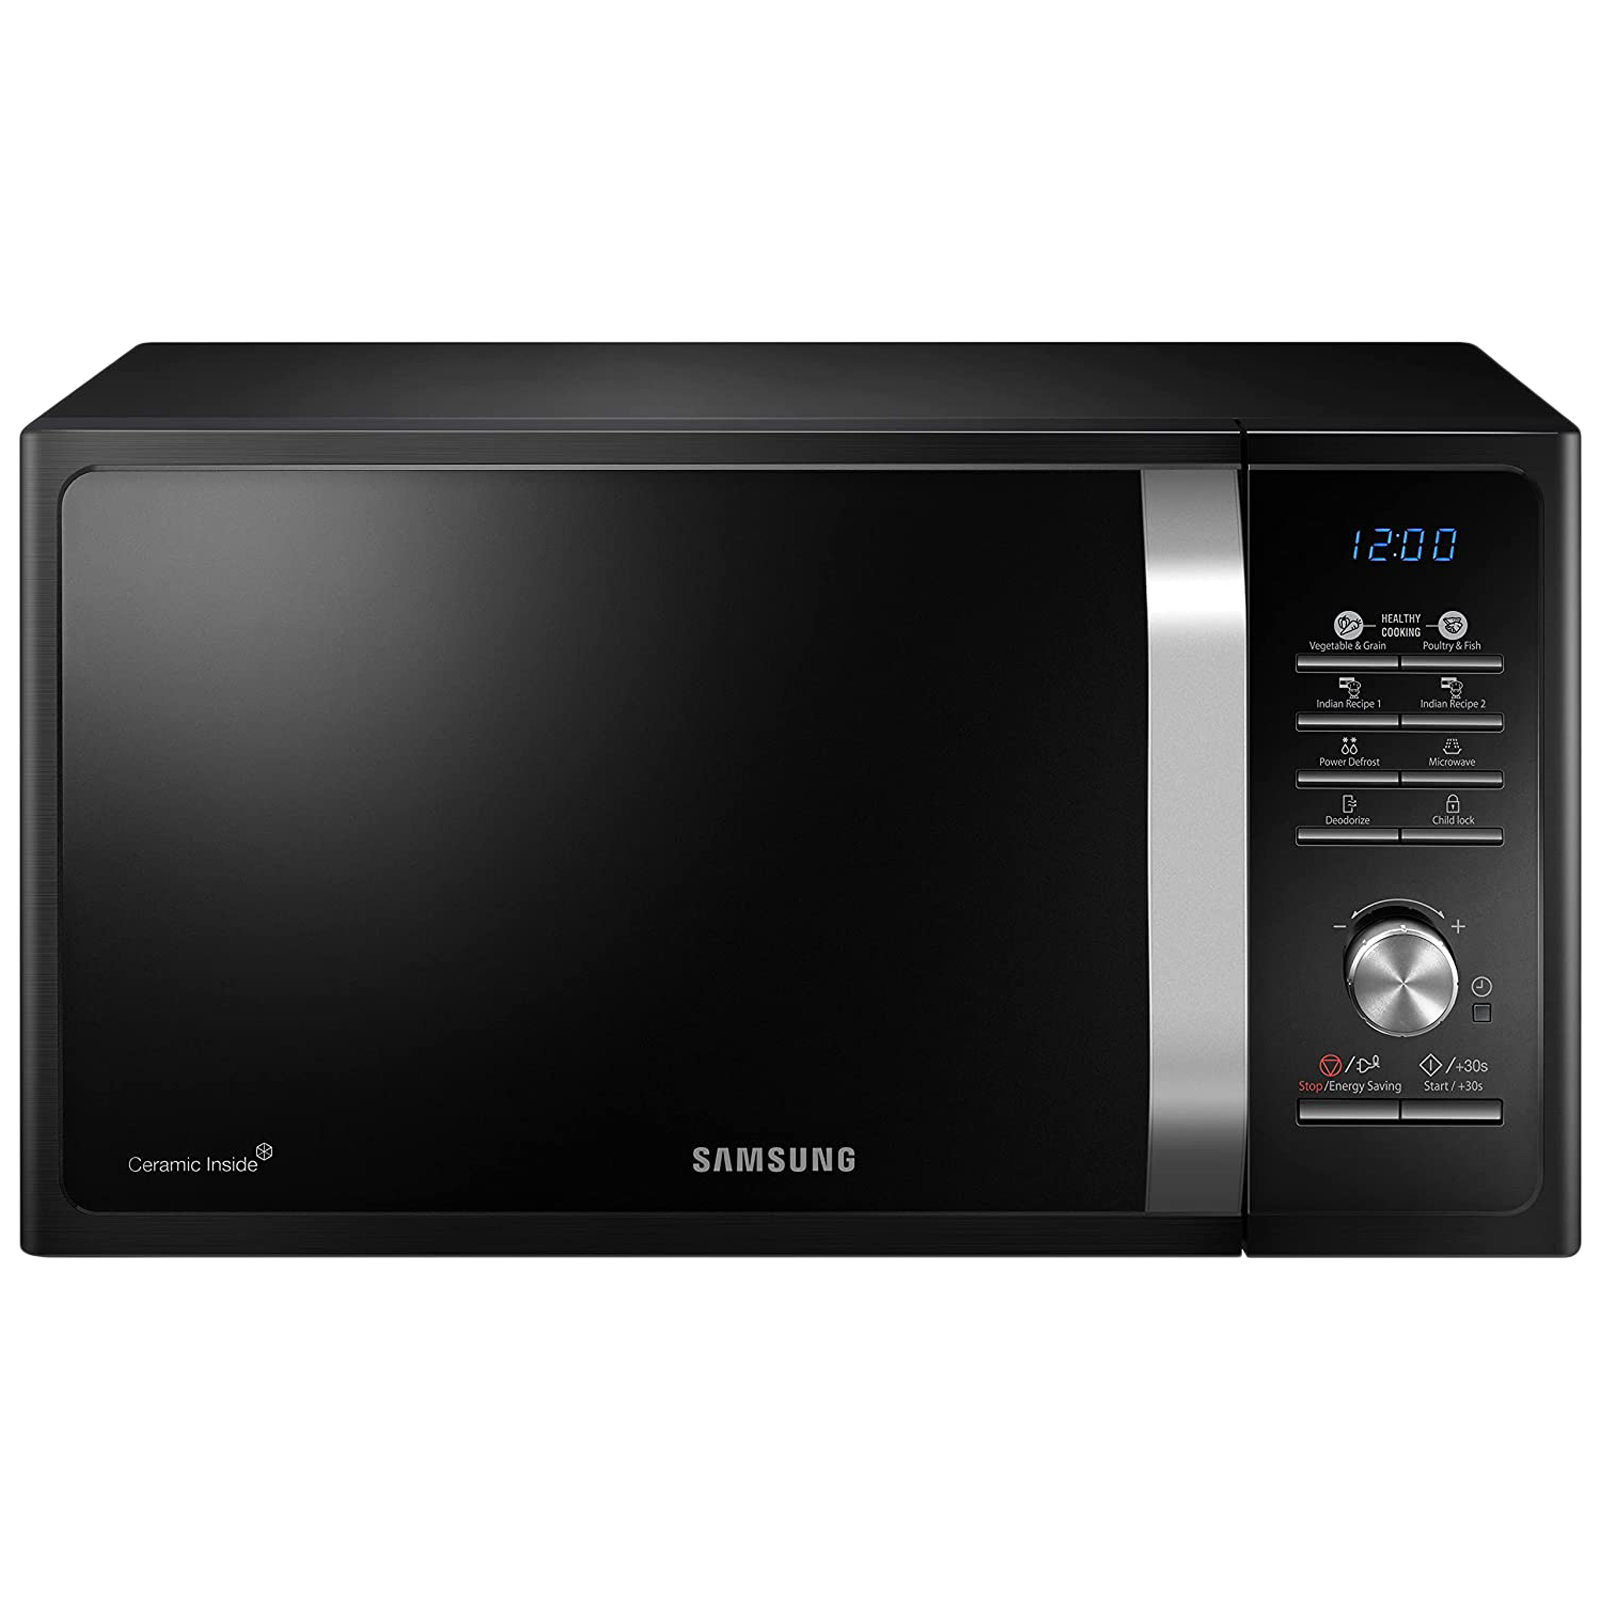 Væve Diligence gentage Buy SAMSUNG 23 Litres Solo Microwave Oven (20 Preset Cooking Mode with  Power Defrost, MS23A301TAK/TL, Black) Online - Croma